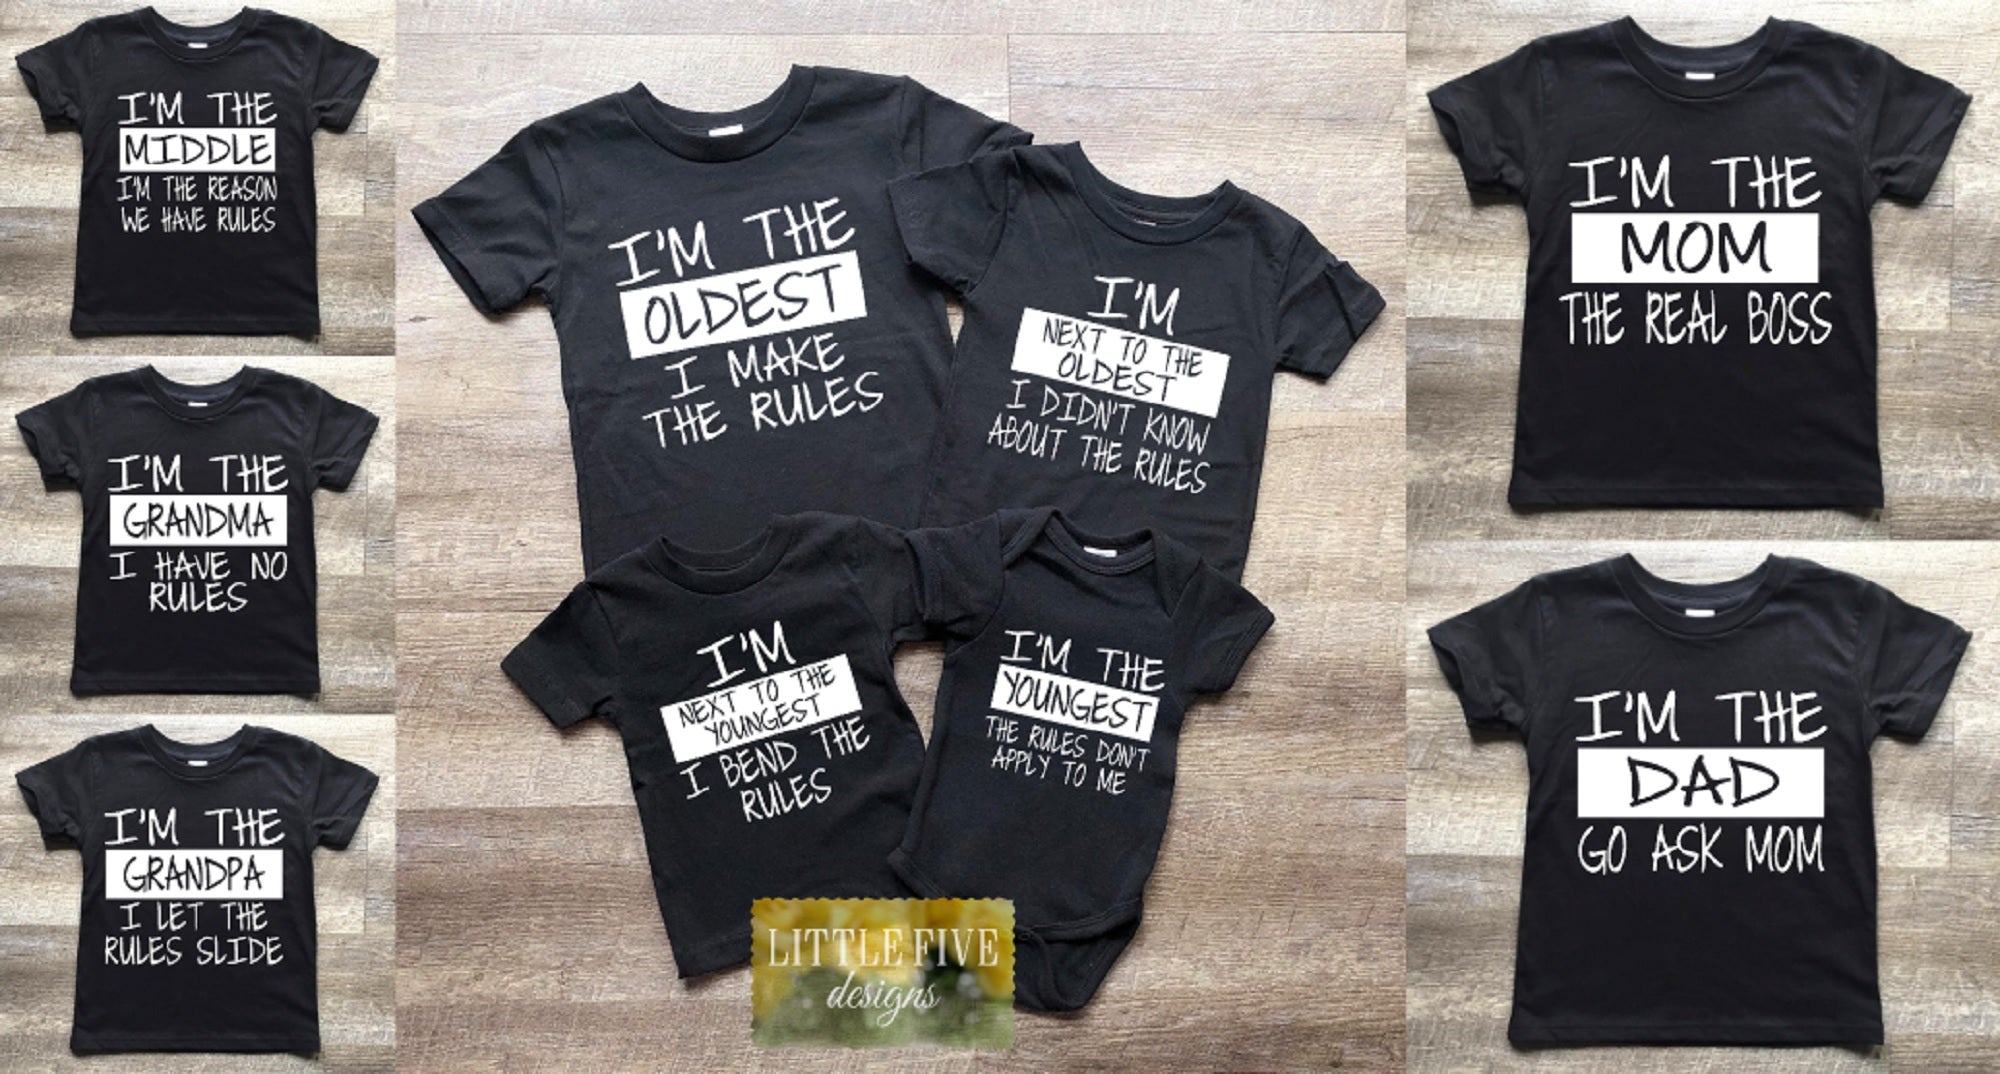 Family Sibling Shirt Set Option - Perfect for family photos & pregnanc ...